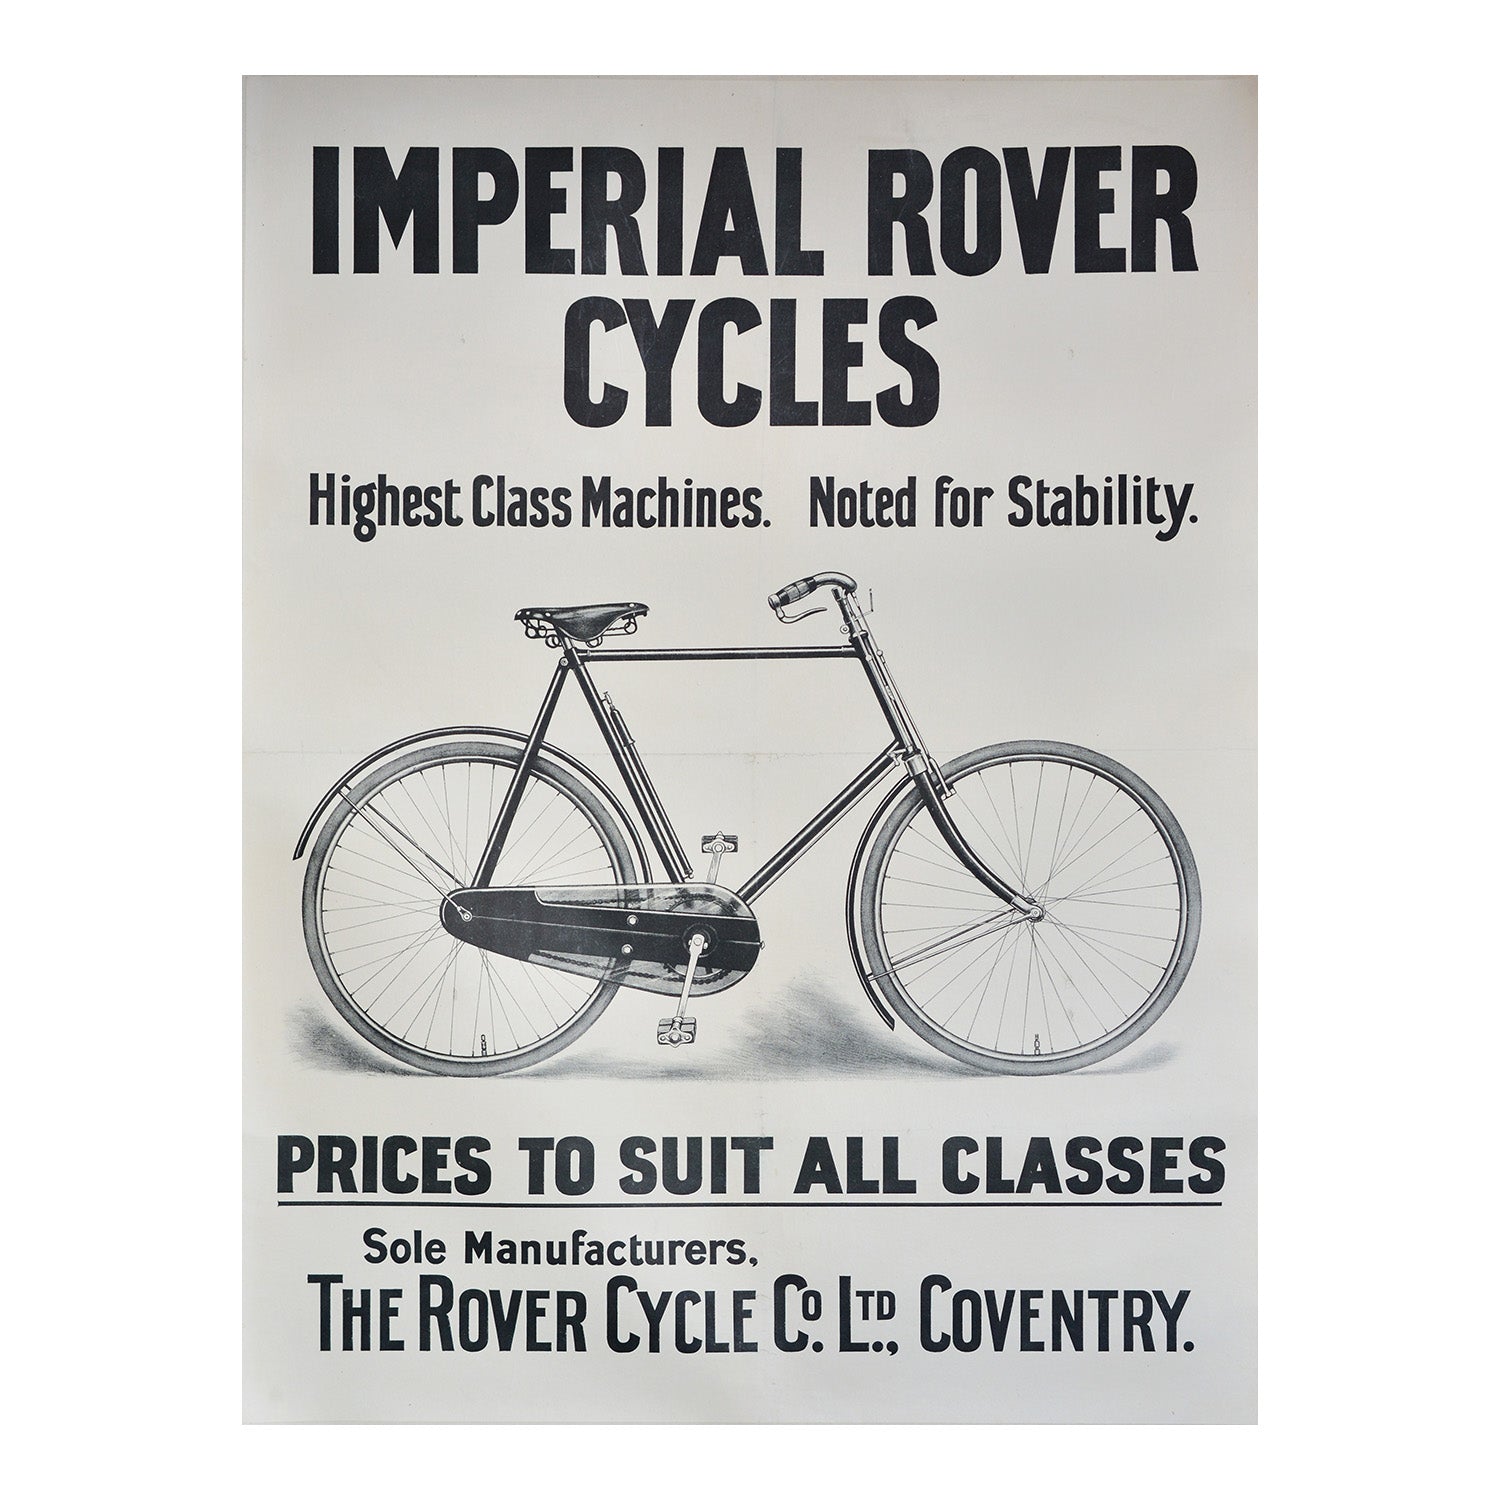 Original promotional poster for the Rover Imperial bicycle, c. 1930. Image features an Imperial Rover bicycle with the caption 'Prices to suit all classes'.